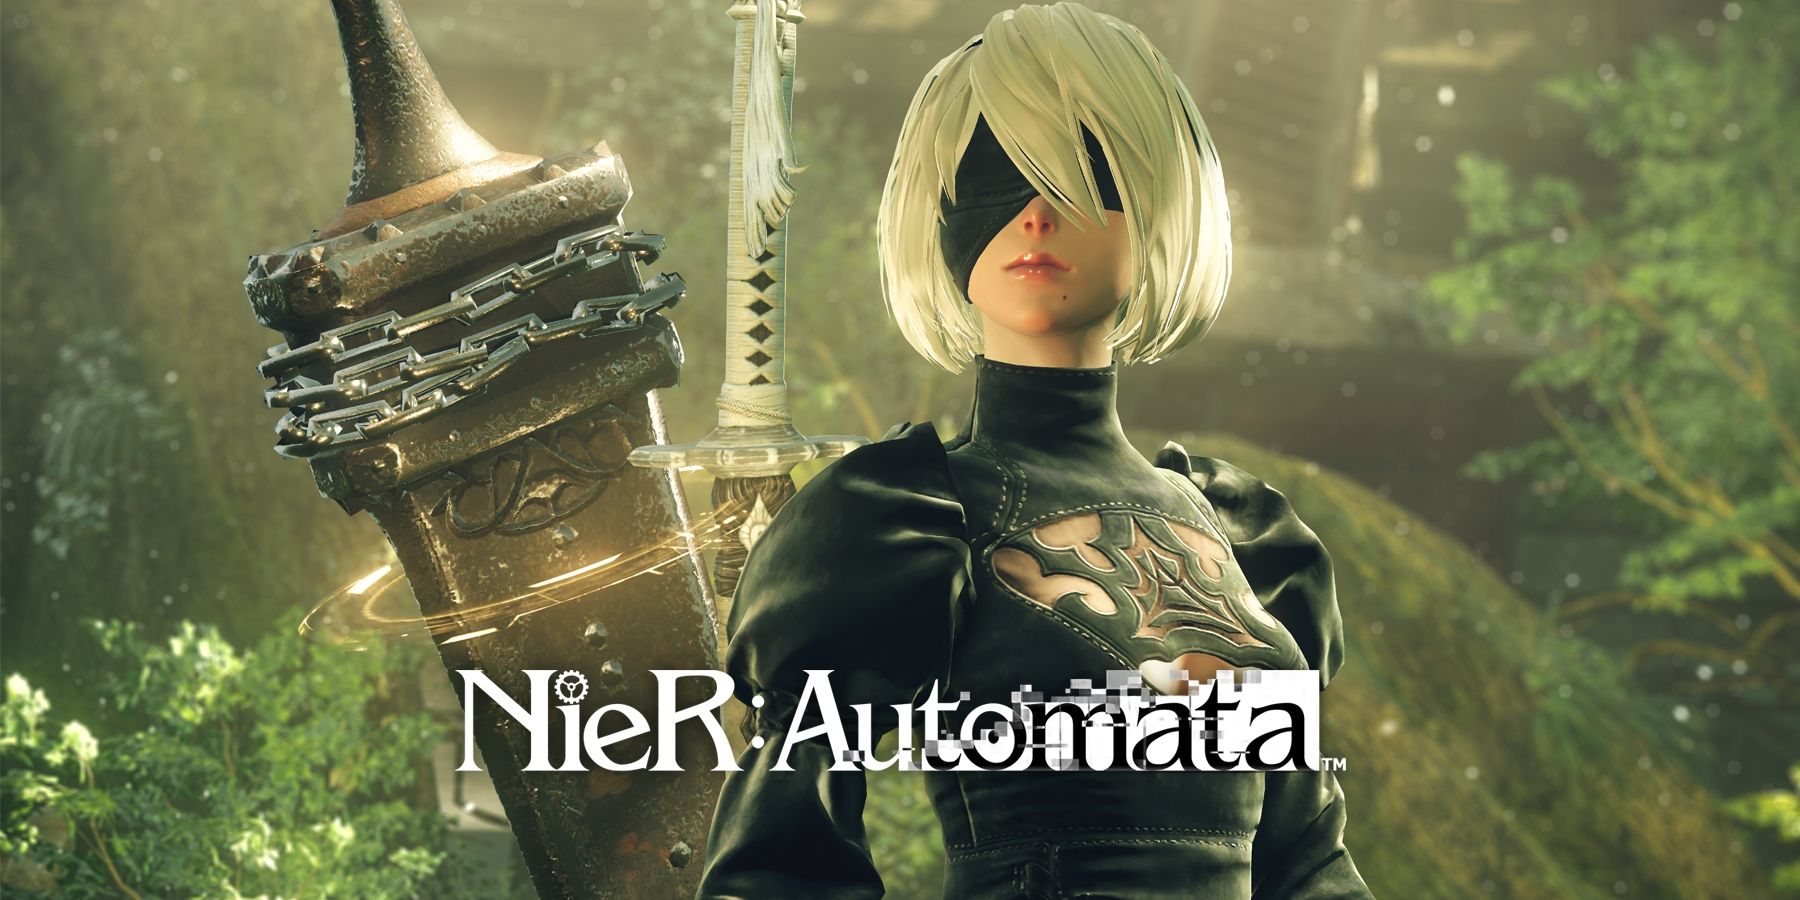 2B from Nier Automata.